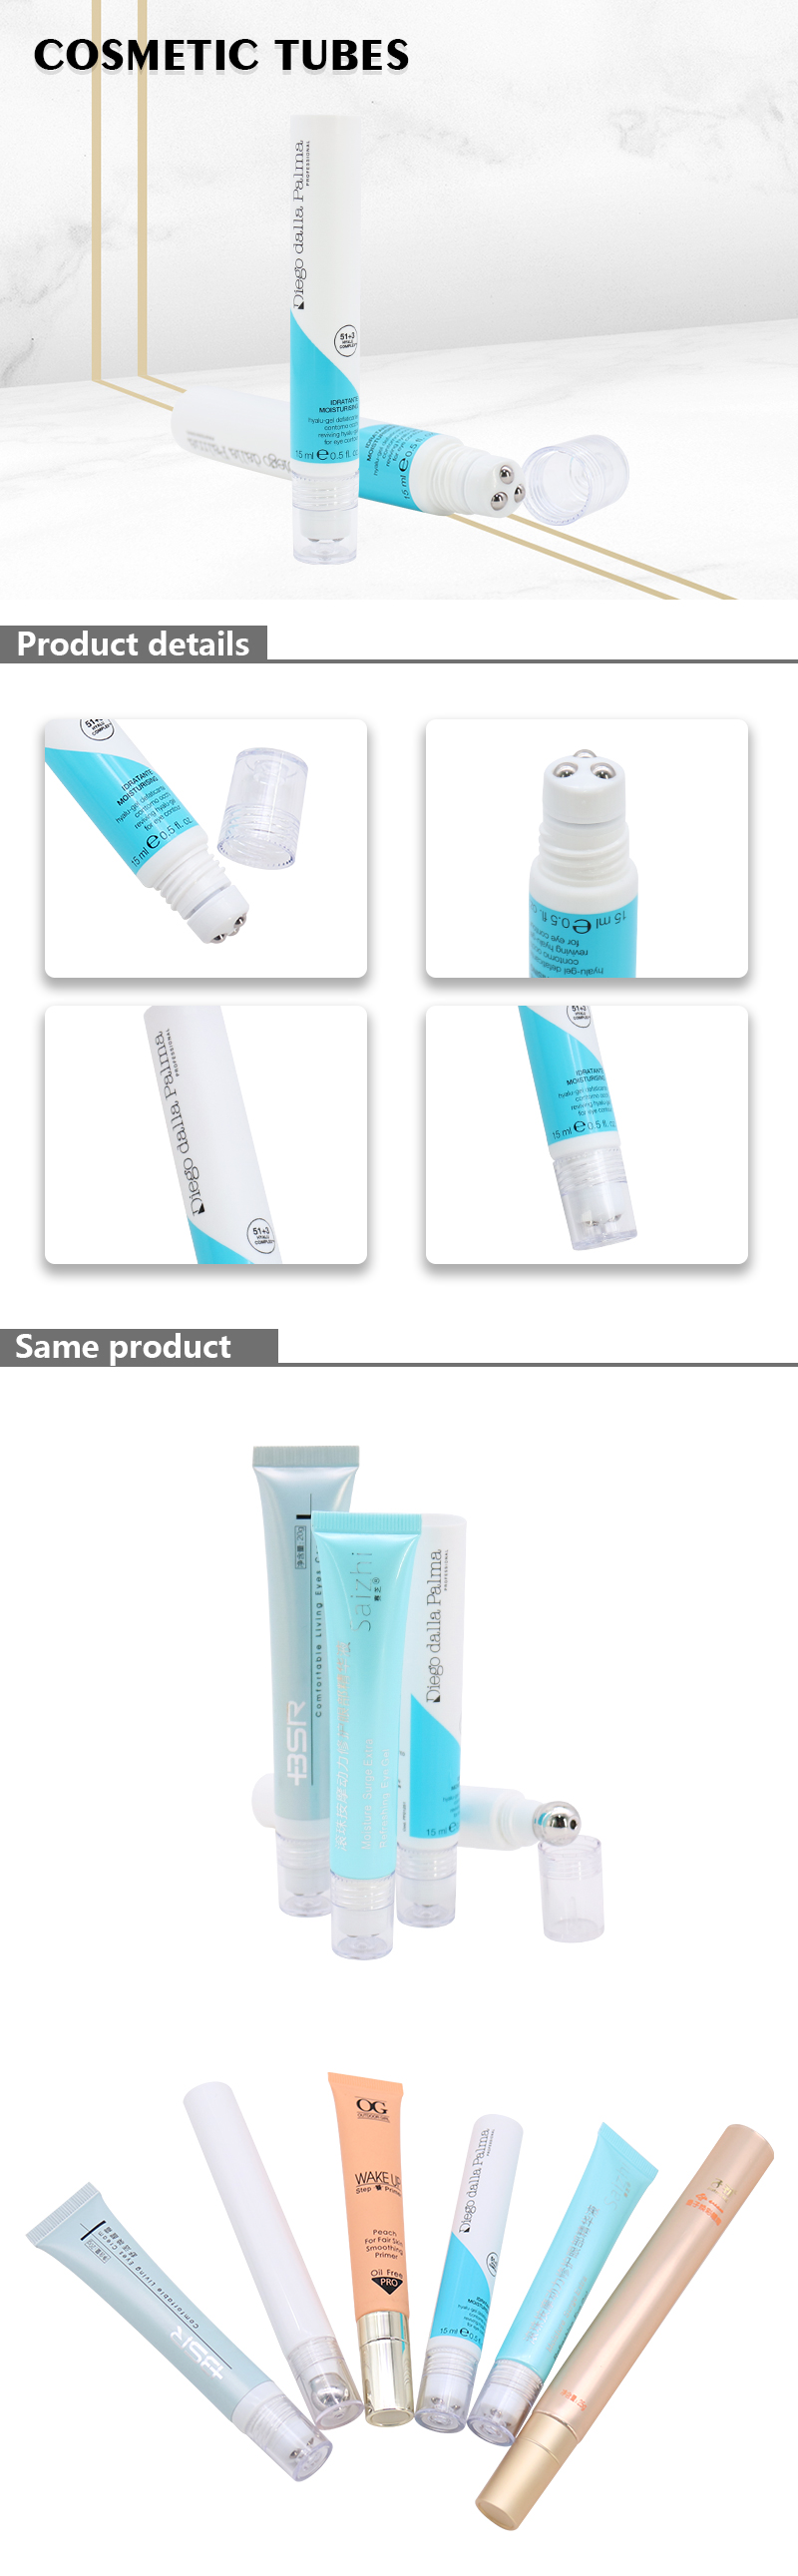 cosmetic tube packaging with three roller balls